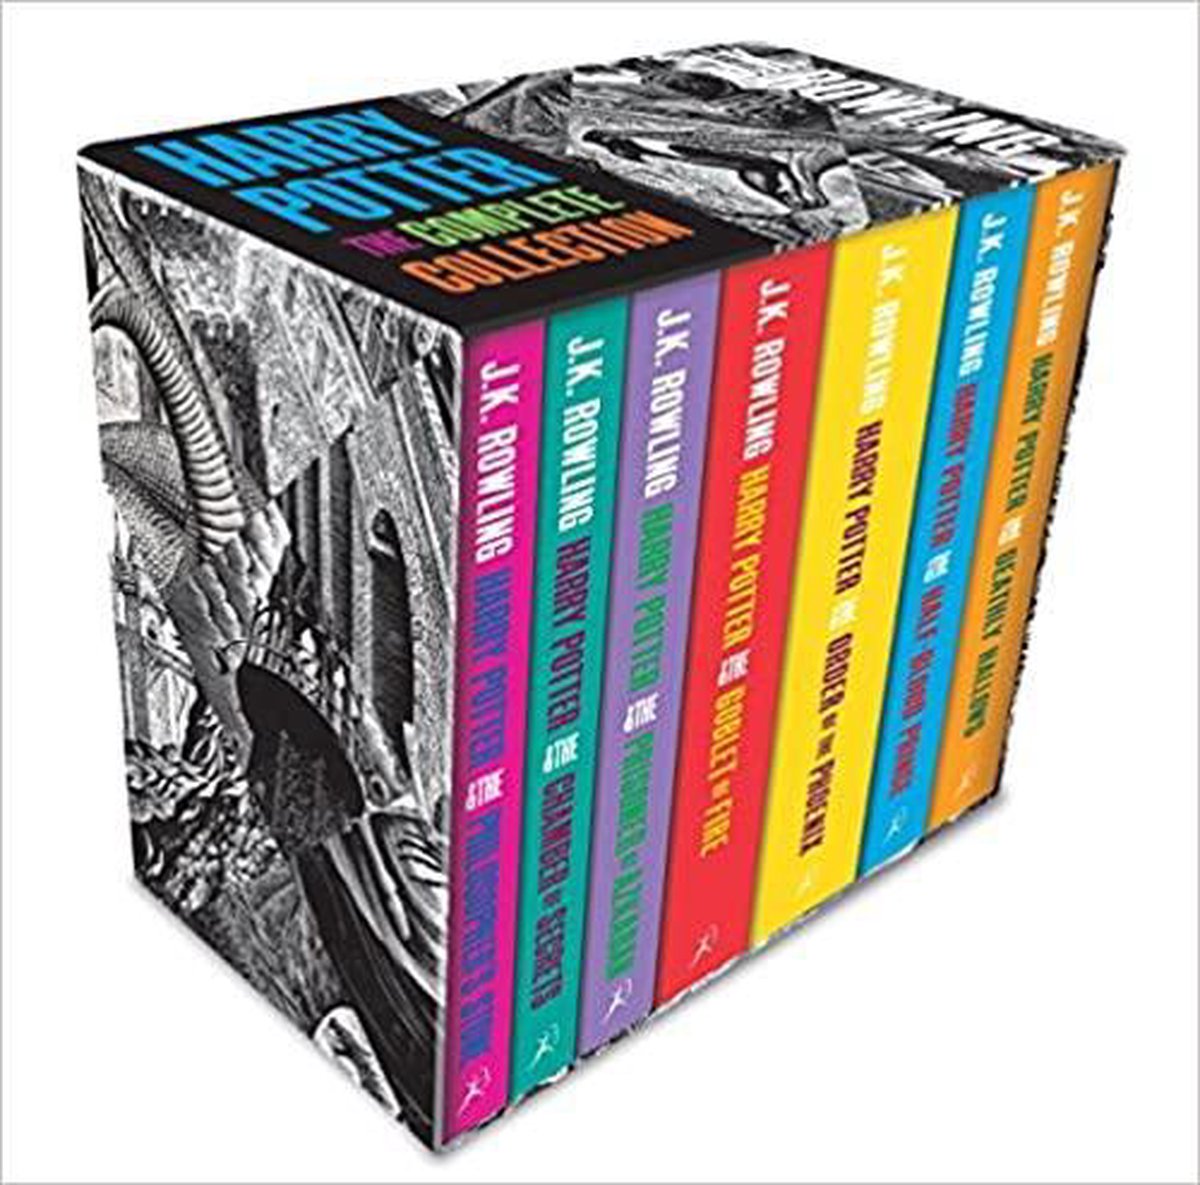 frequentie verbergen resterend Harry Potter Boxed Set: The Complete Collection (Adult Paperback) | bol.com